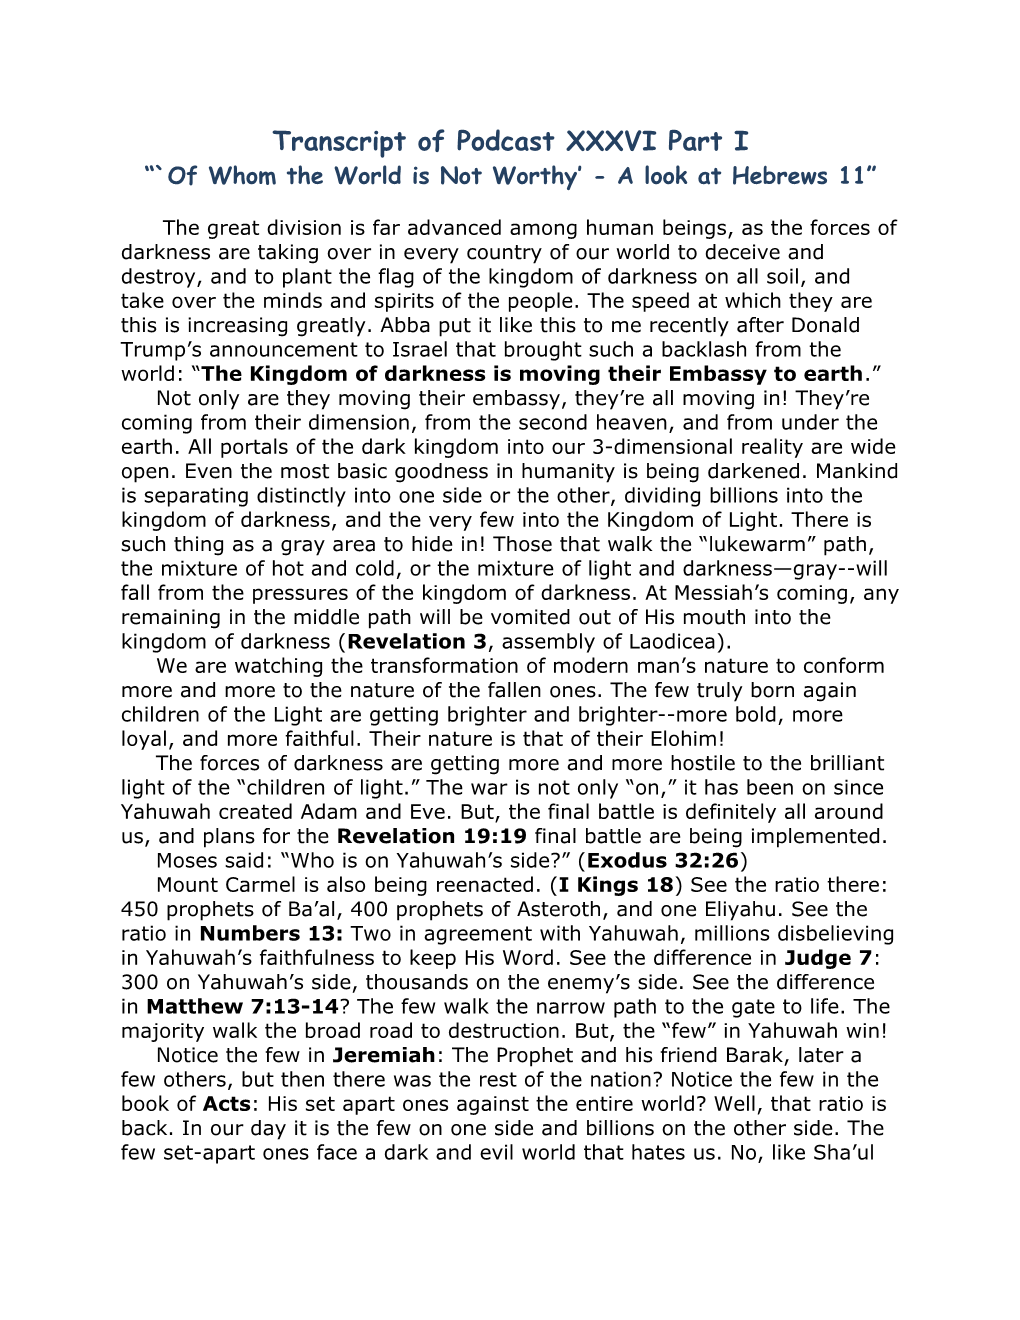 Of Whom the World Is Not Worthy -A Look at Hebrews 11